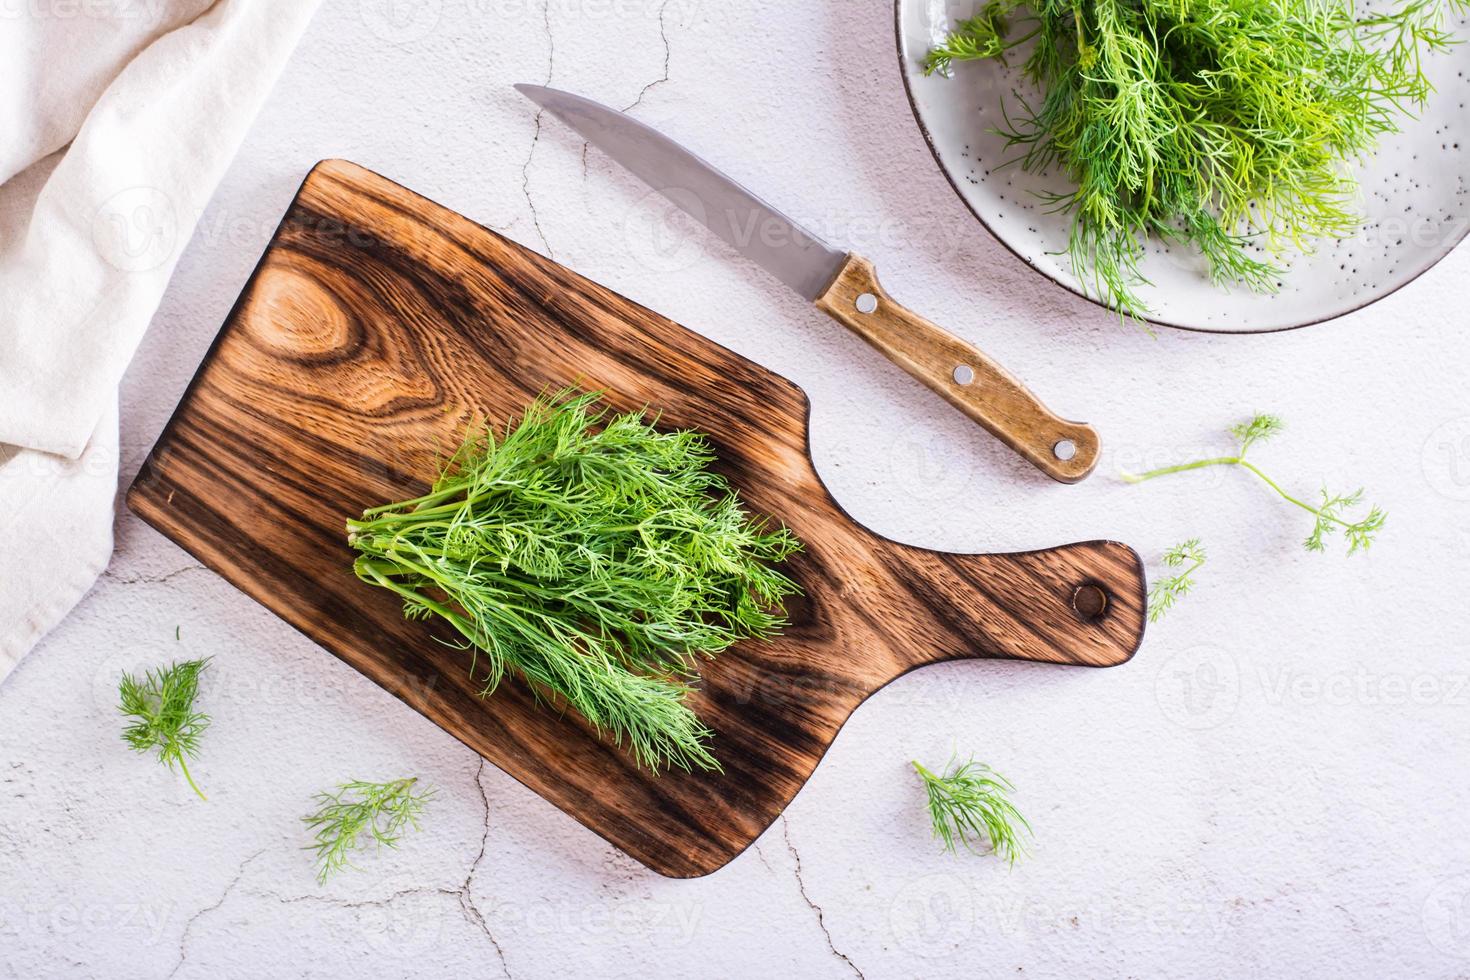 A bunch of fresh dill on a cutting board on the table. Organic seasoning. Top view photo